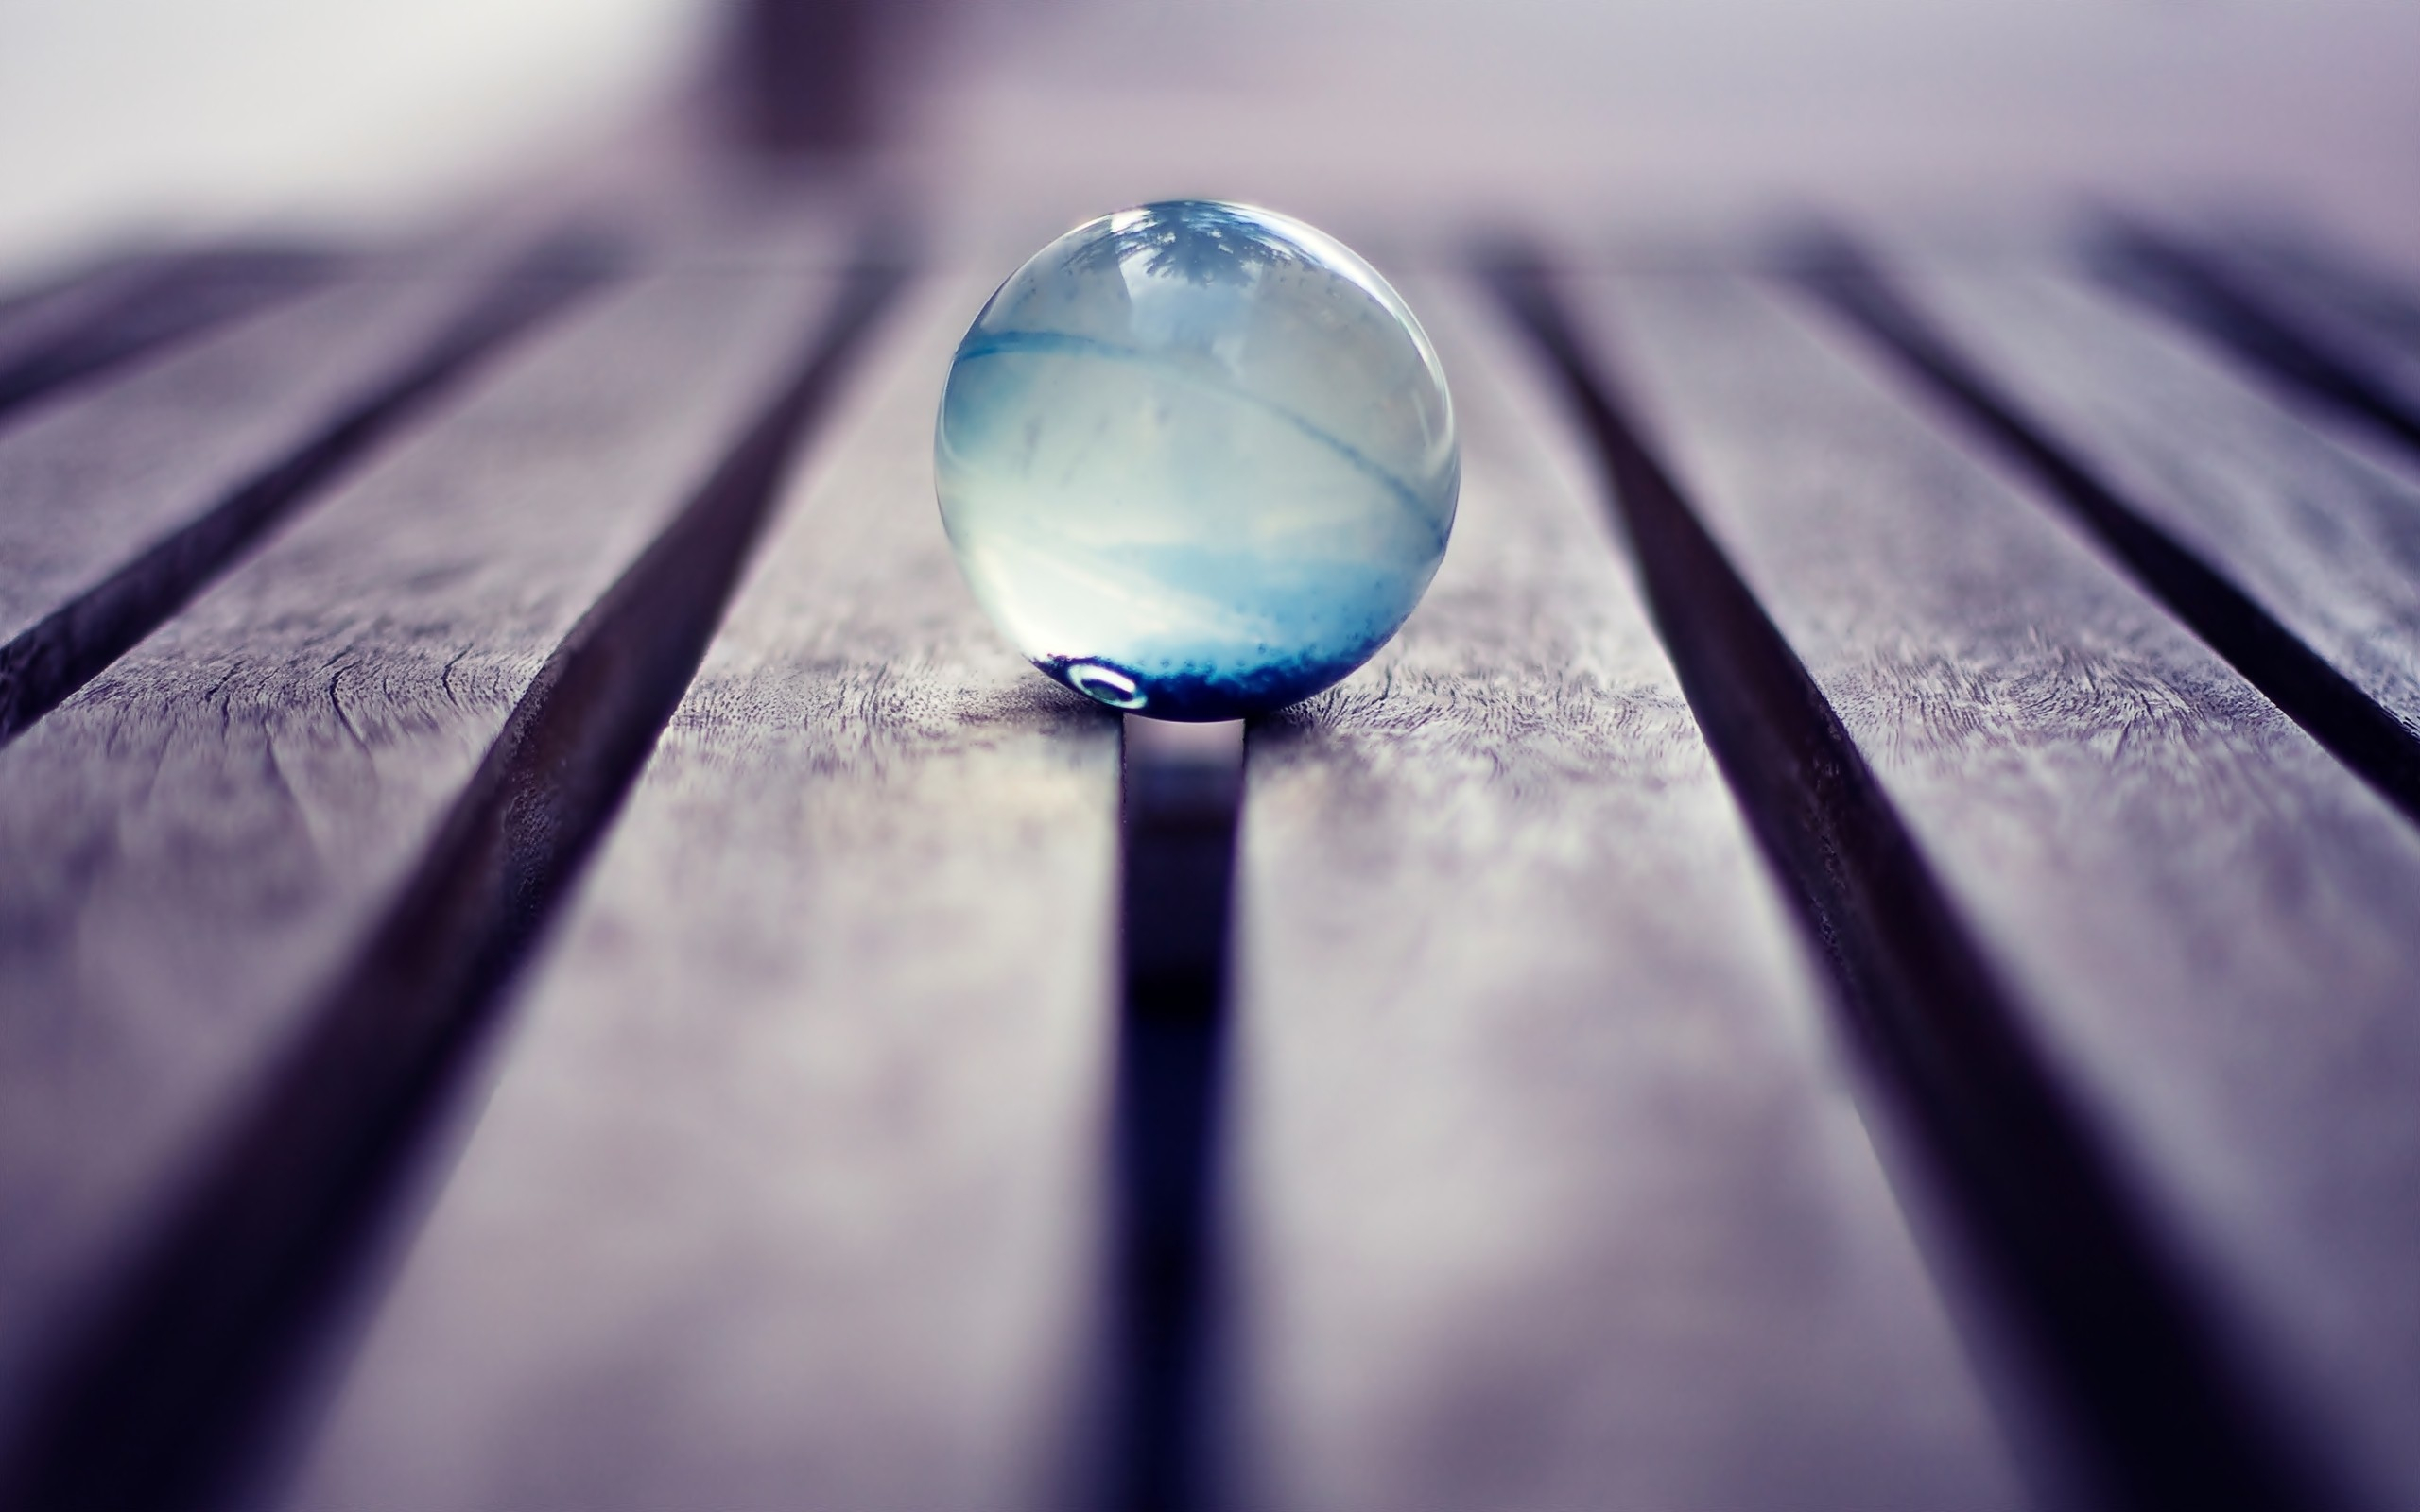 2560x1600 Wallpaper : white, black, wooden surface, reflection, wood, blue, glass, circle, marble, translucent, light, color, drop, shape, jewellery, close up, macro photography MemphisRains 260333 HD Wallpapers